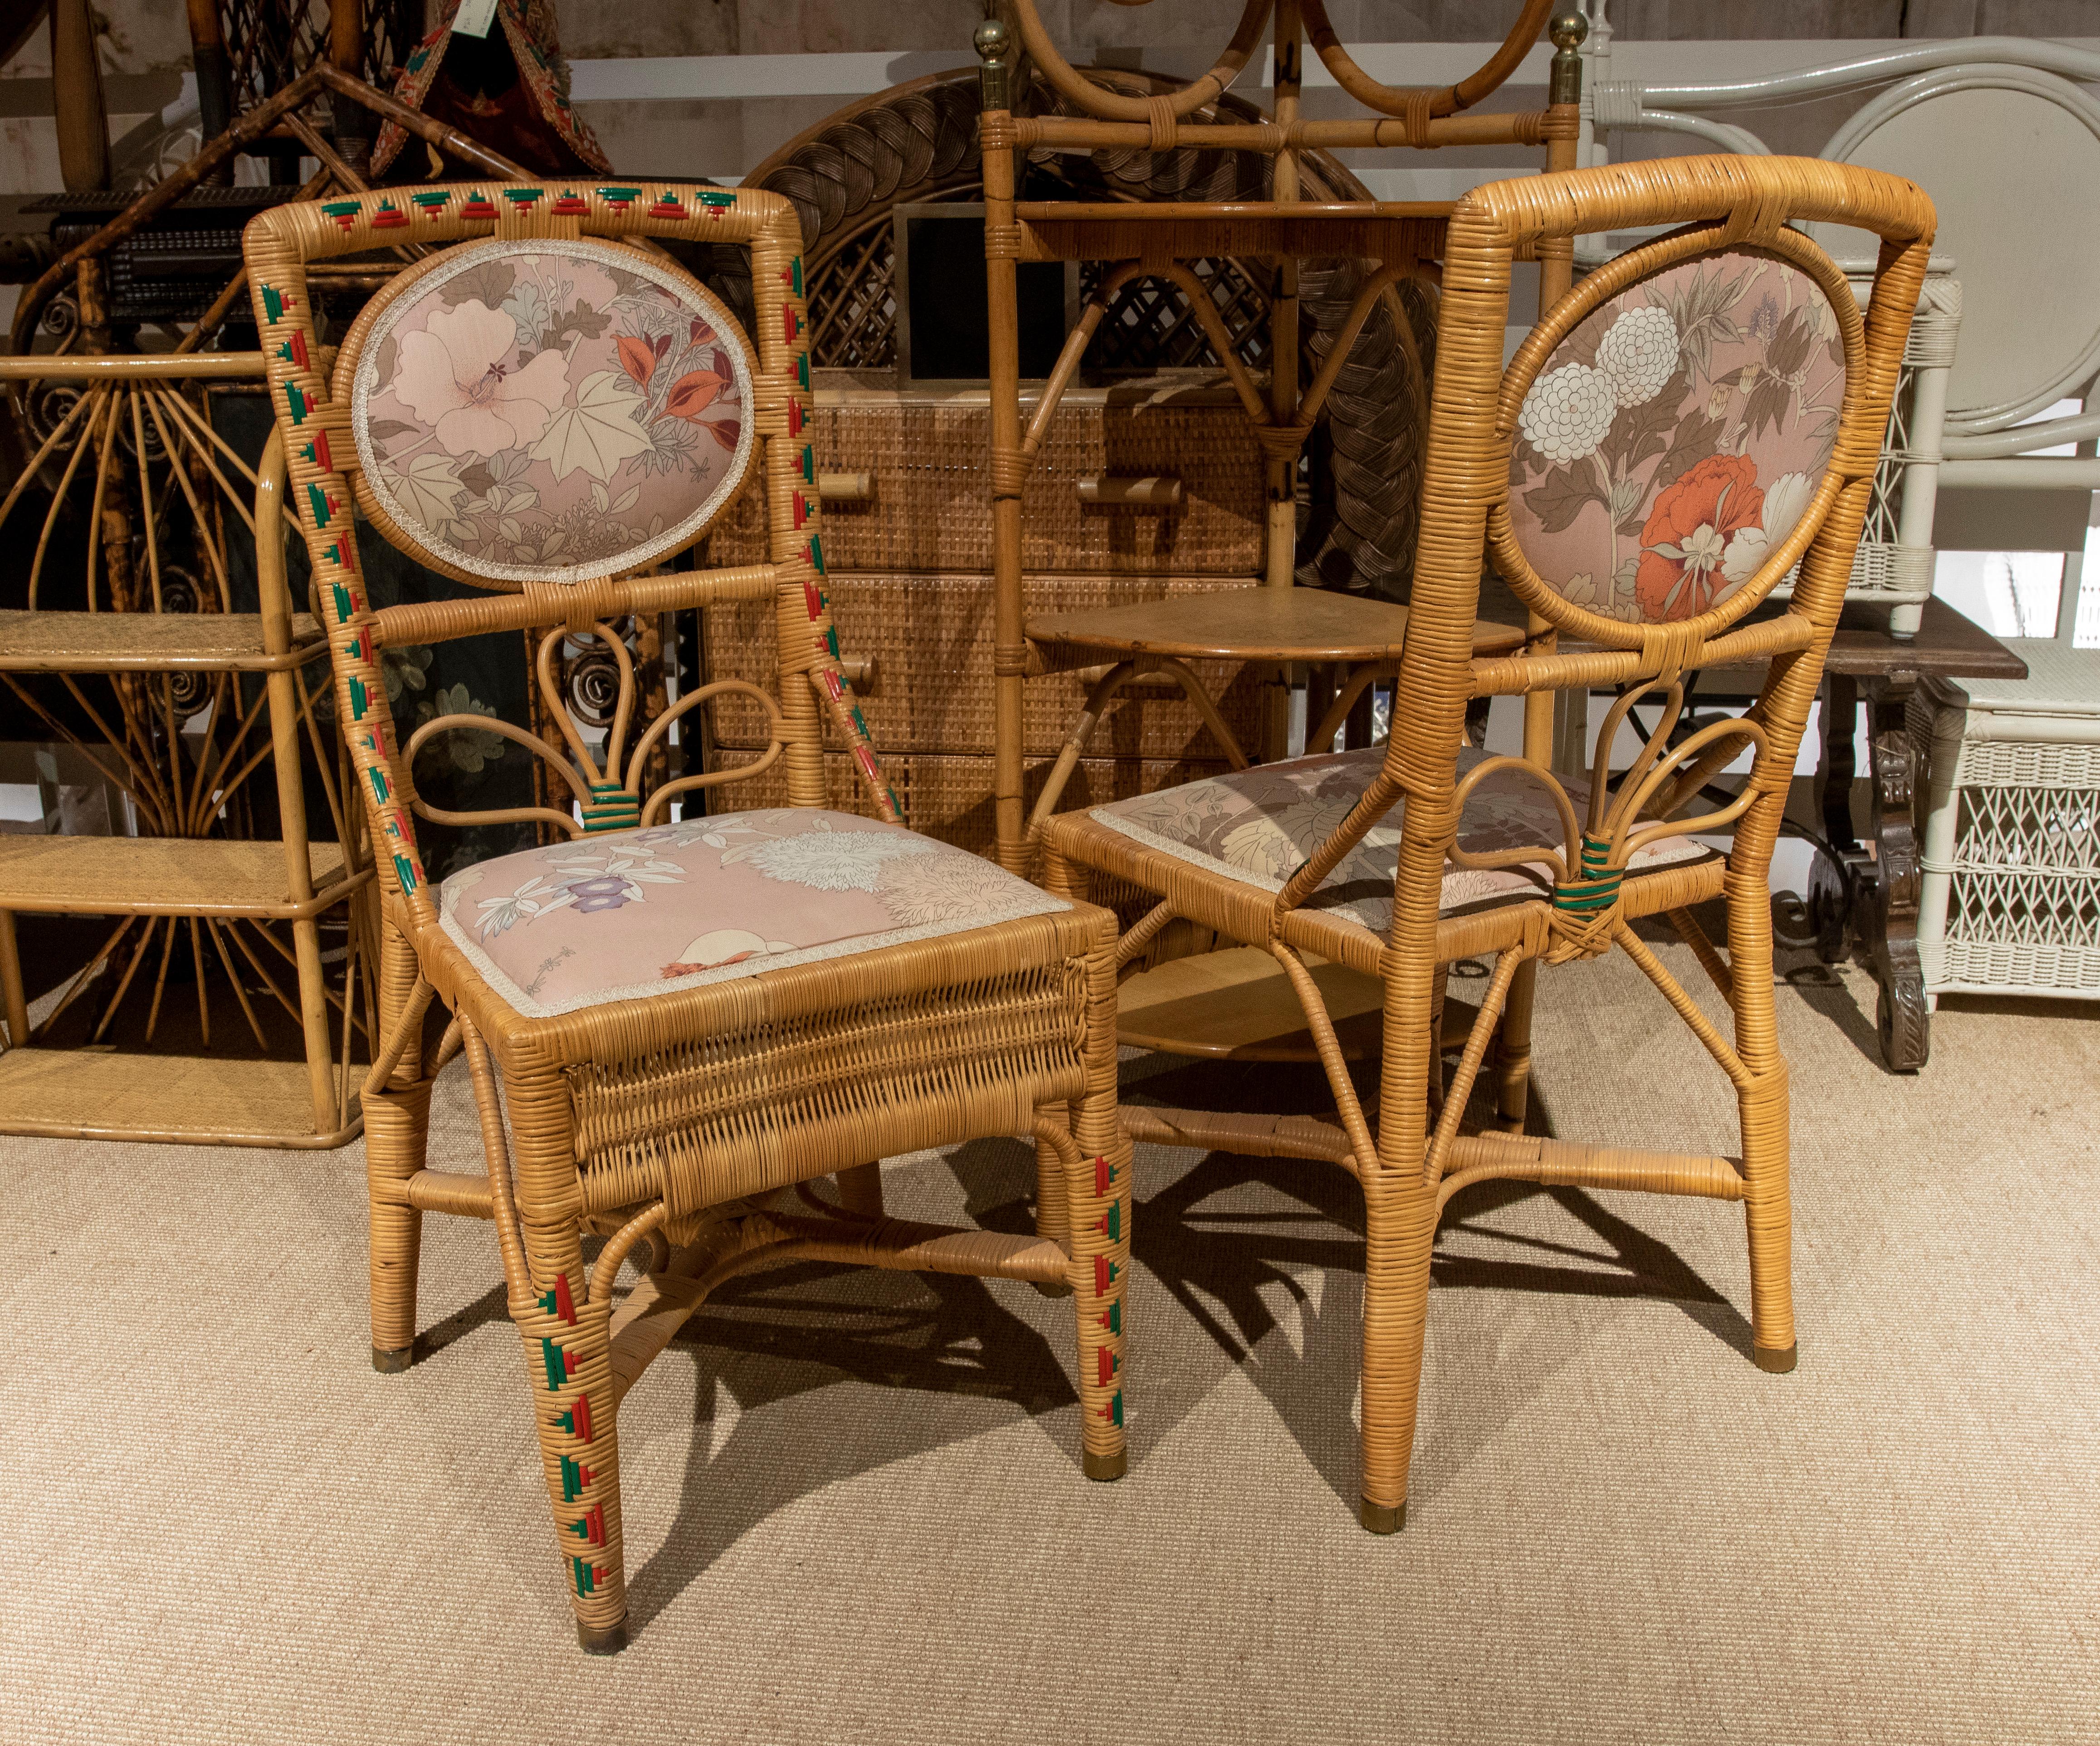 20th Century French Pair of Handmade Wicker Chairs with Colorful Decoration